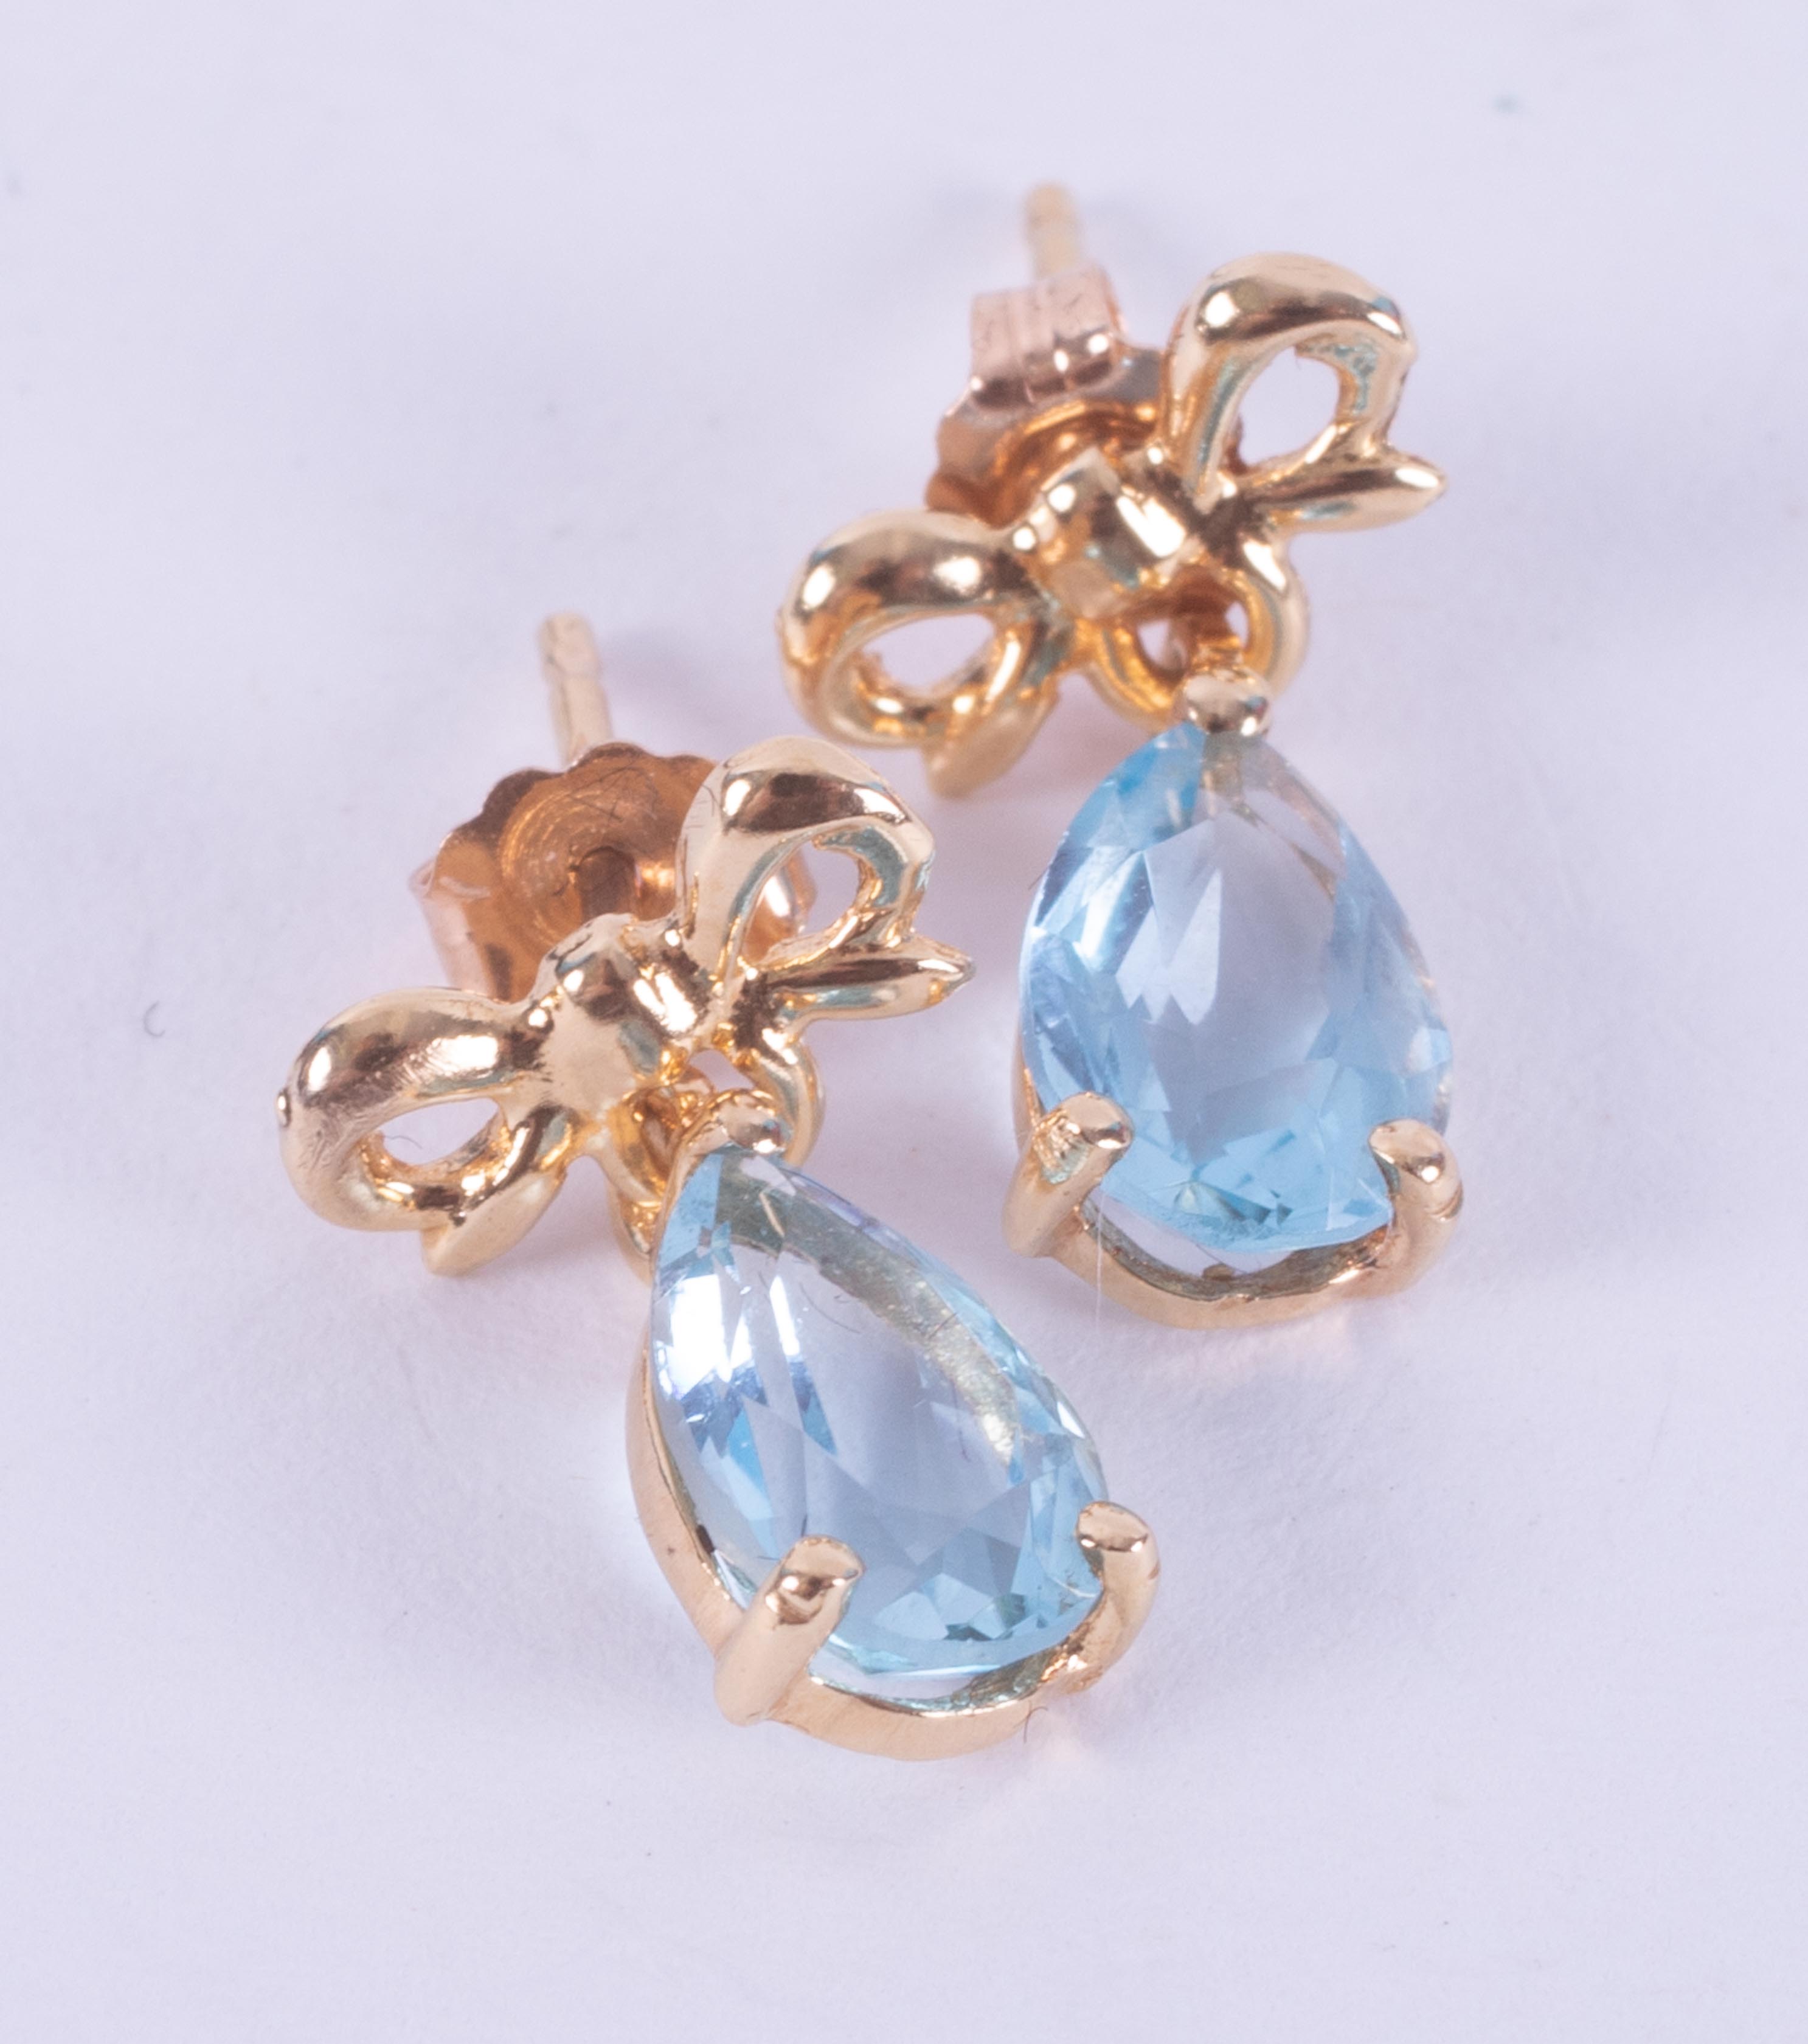 A pair of 18ct yellow gold drop earrings set with a pear shaped blue topaz and a gold bow design